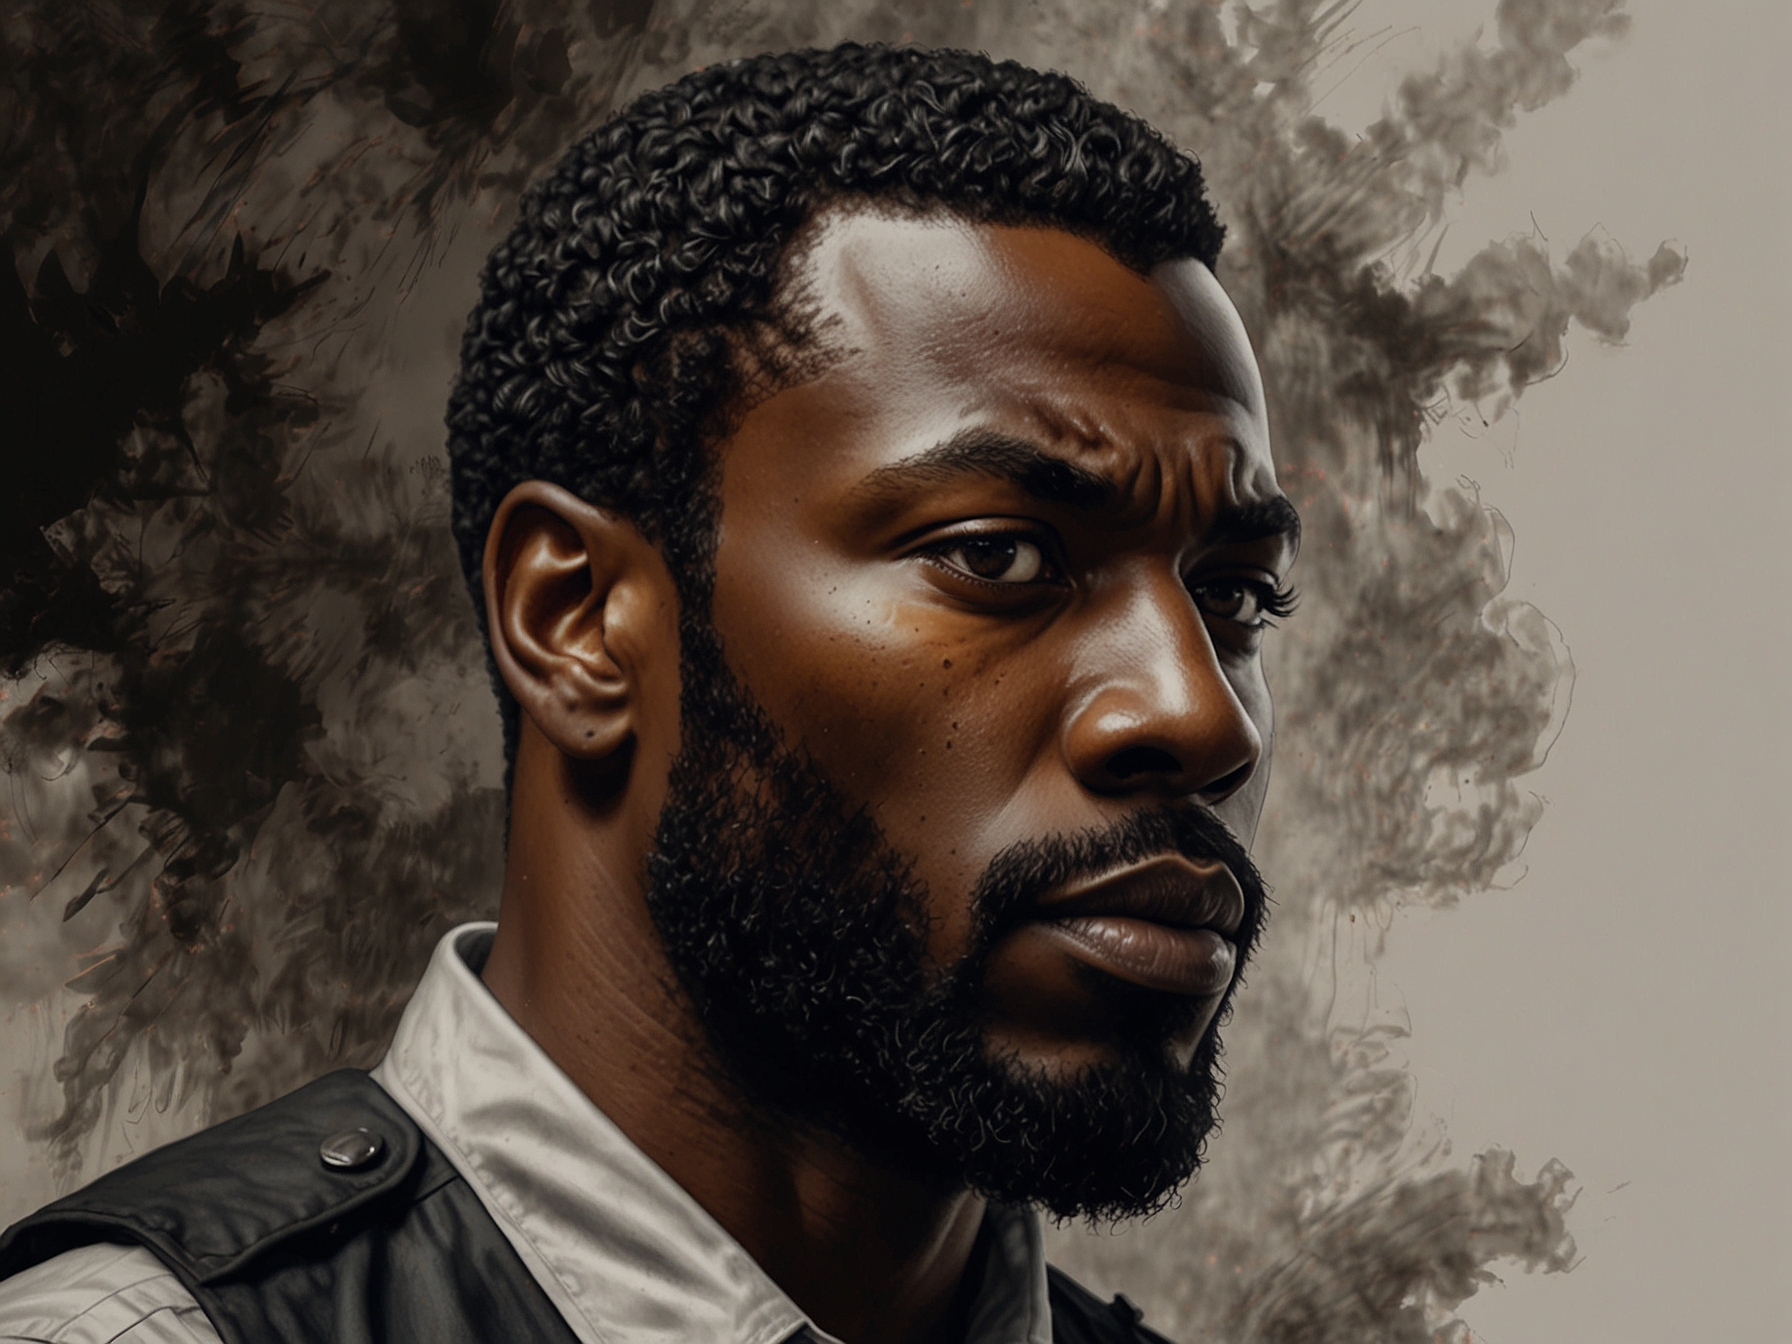 Yahya Abdul-Mateen II as John Creasy, depicting a moment of profound reflection and struggle, portraying the intense psychological journey central to the 'Man on Fire' narrative.